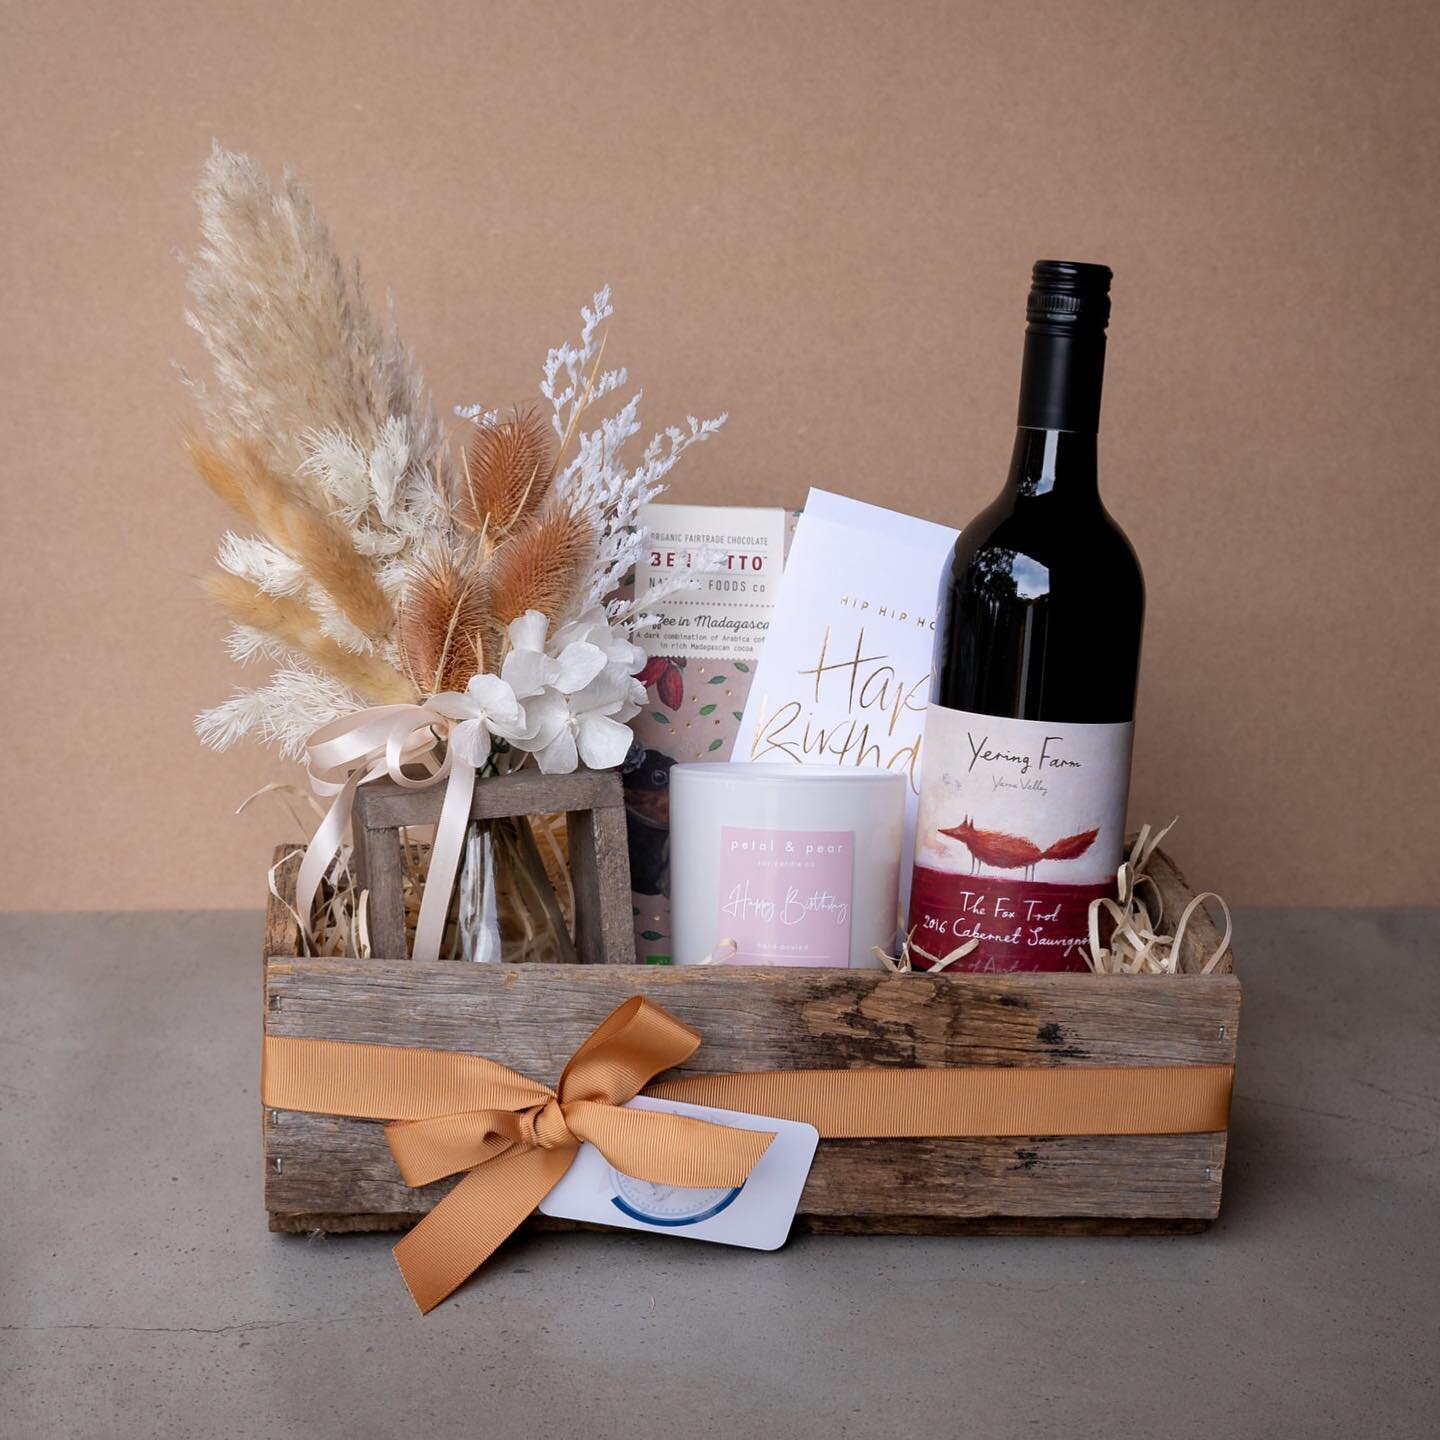 Got someone special celebrating a birthday or occasion soon? We have the perfect hamper combination for them! This hand crafted wooden hamper has the best local wine from @yeringfarmwines , a soy hand by @petalandpear_ a @justsmitten_cards card, fair